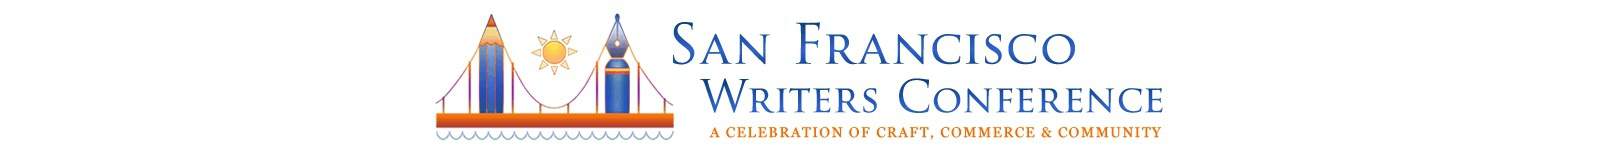 San Franciso Writers Conference Banne